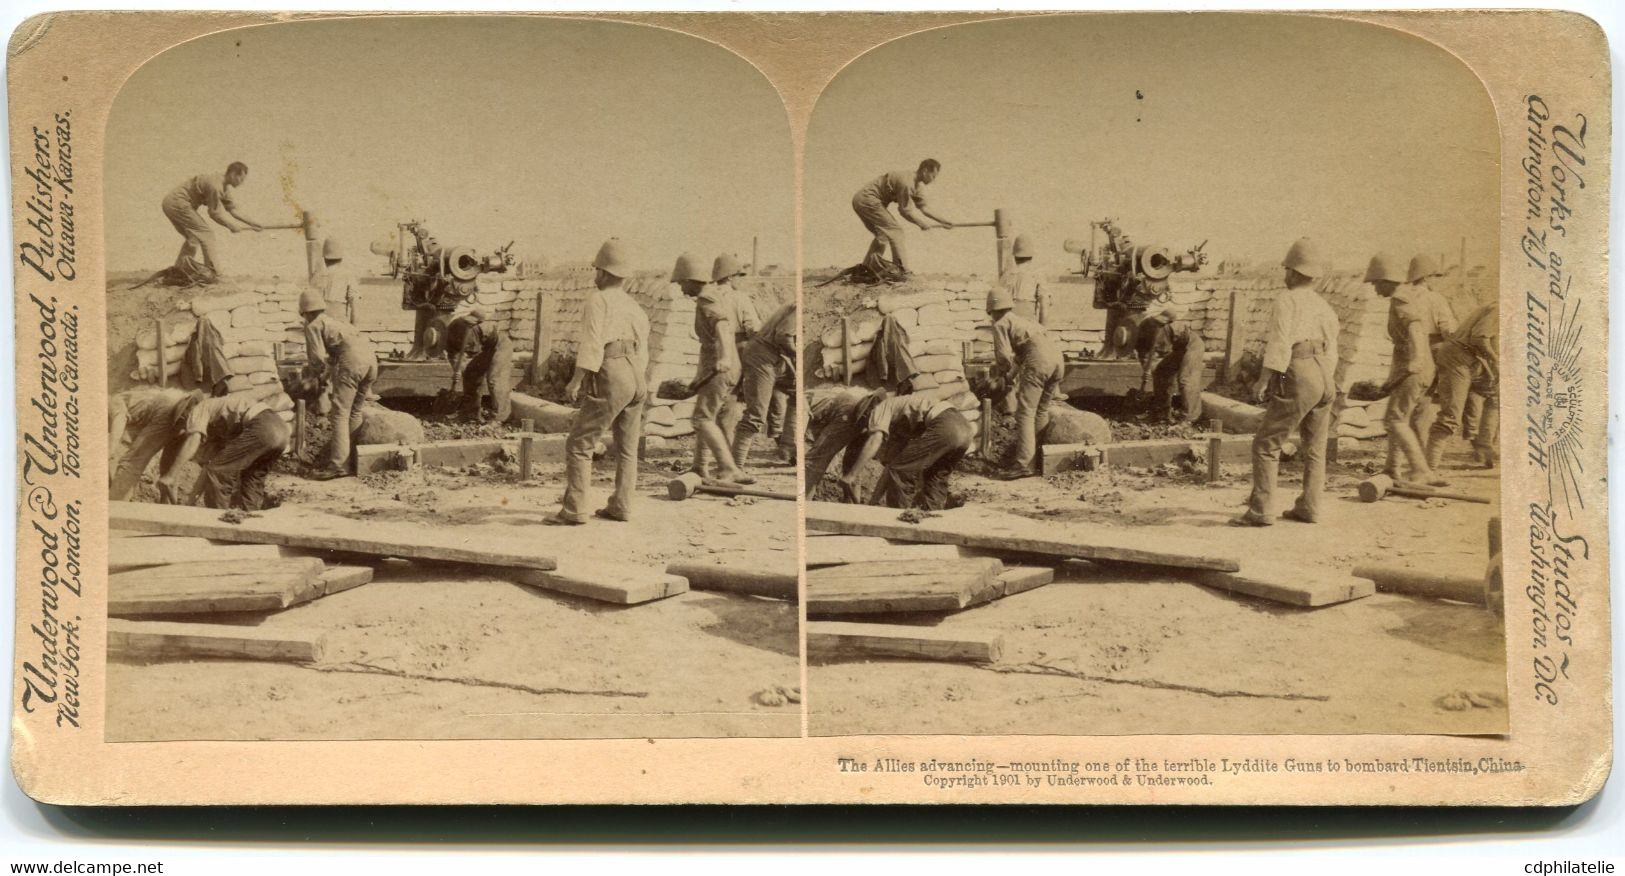 CARTE-PHOTO ? THE ALLIES ADVANCING - MOUNTING ONE THE TERRIBLE LYDDITE GUNS TO BOMBARD TIENTSIN , CHINA - Lettres & Documents